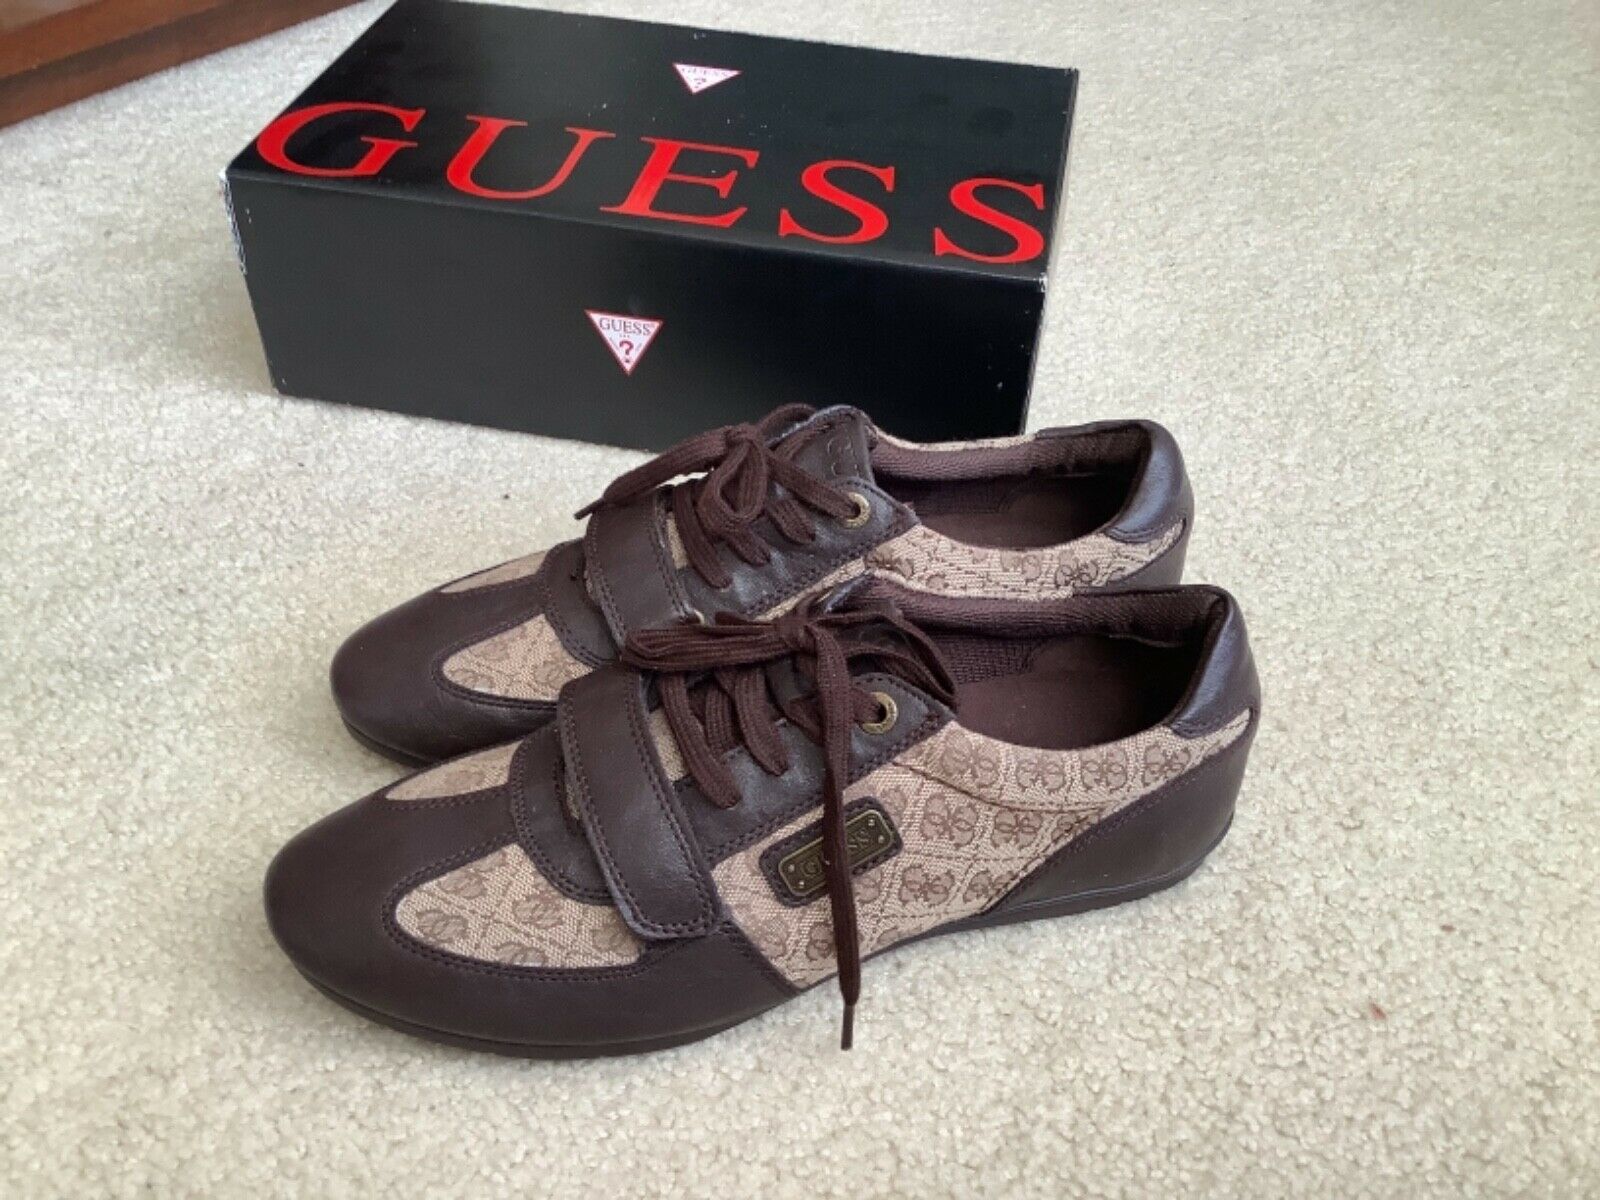 New Guess Men's Actine2 Oxford shoes size 11